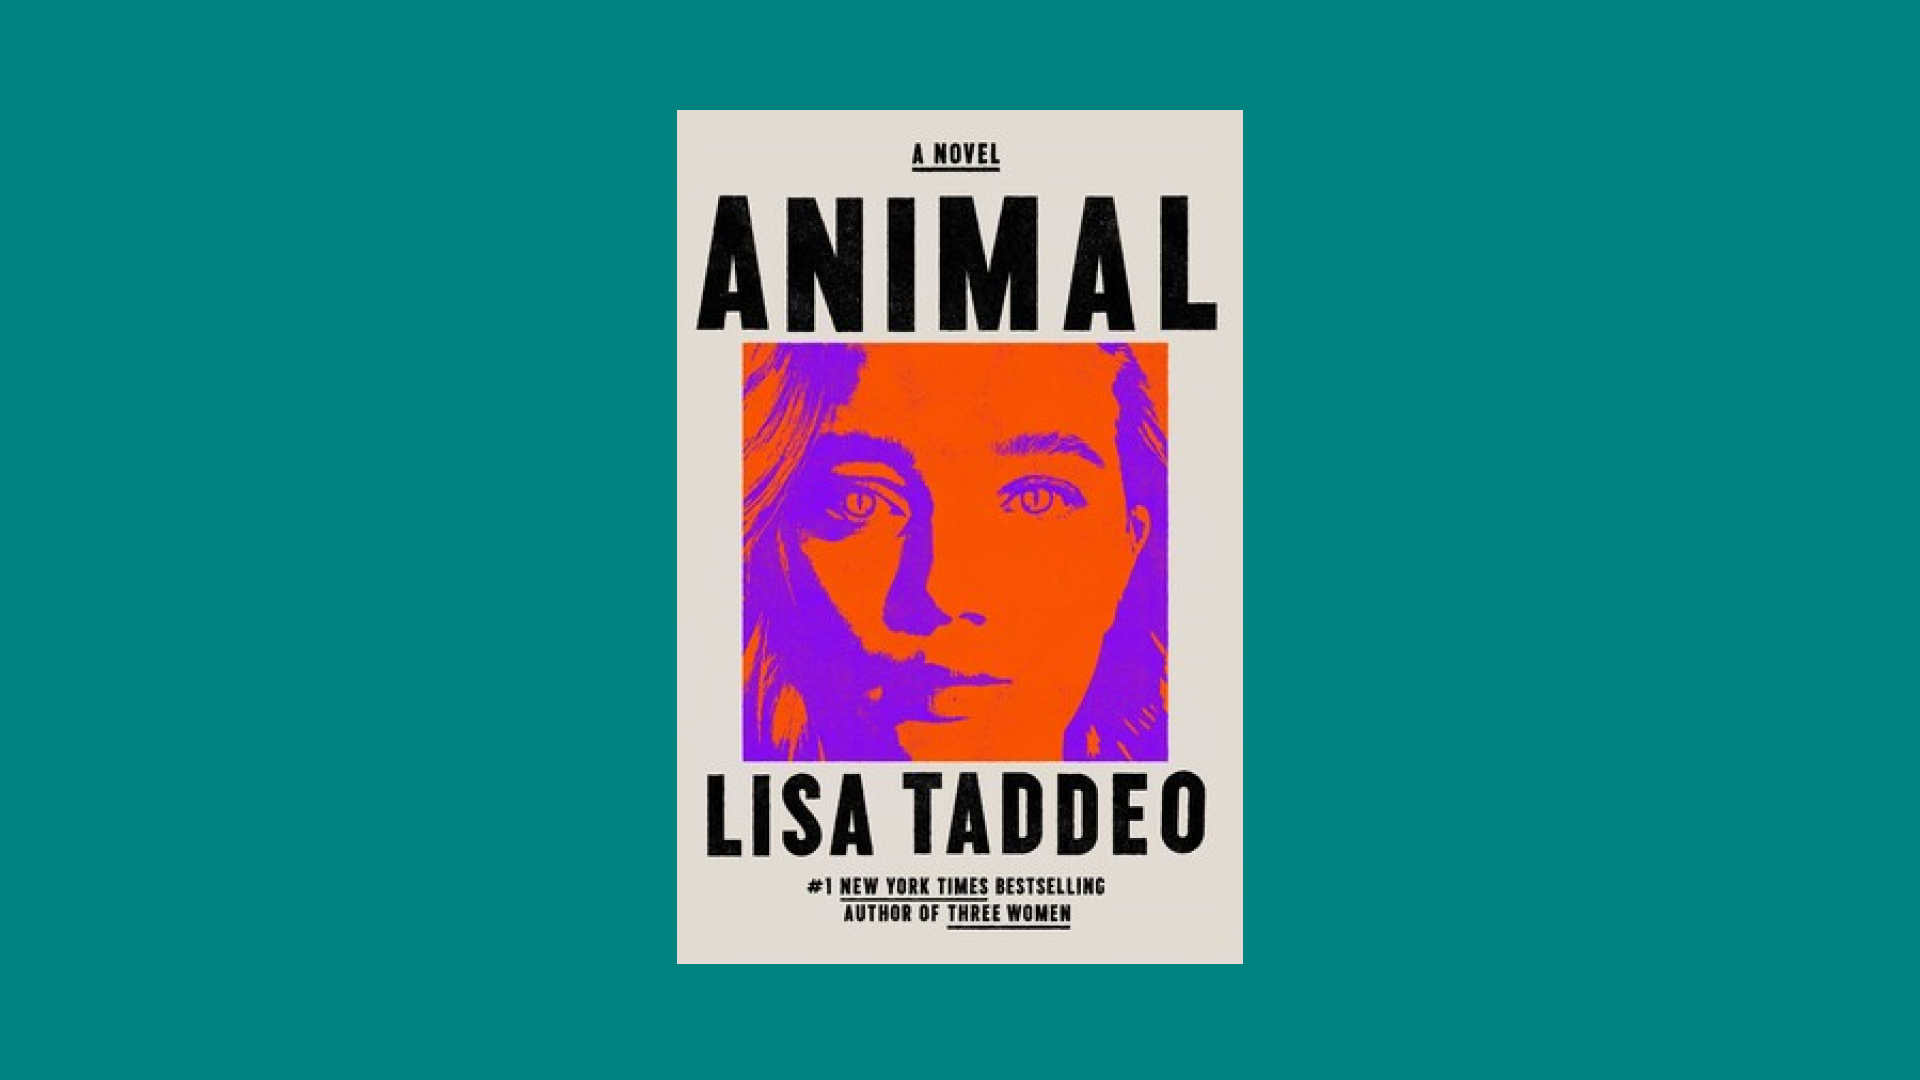 “Animal” by Lisa Taddeo